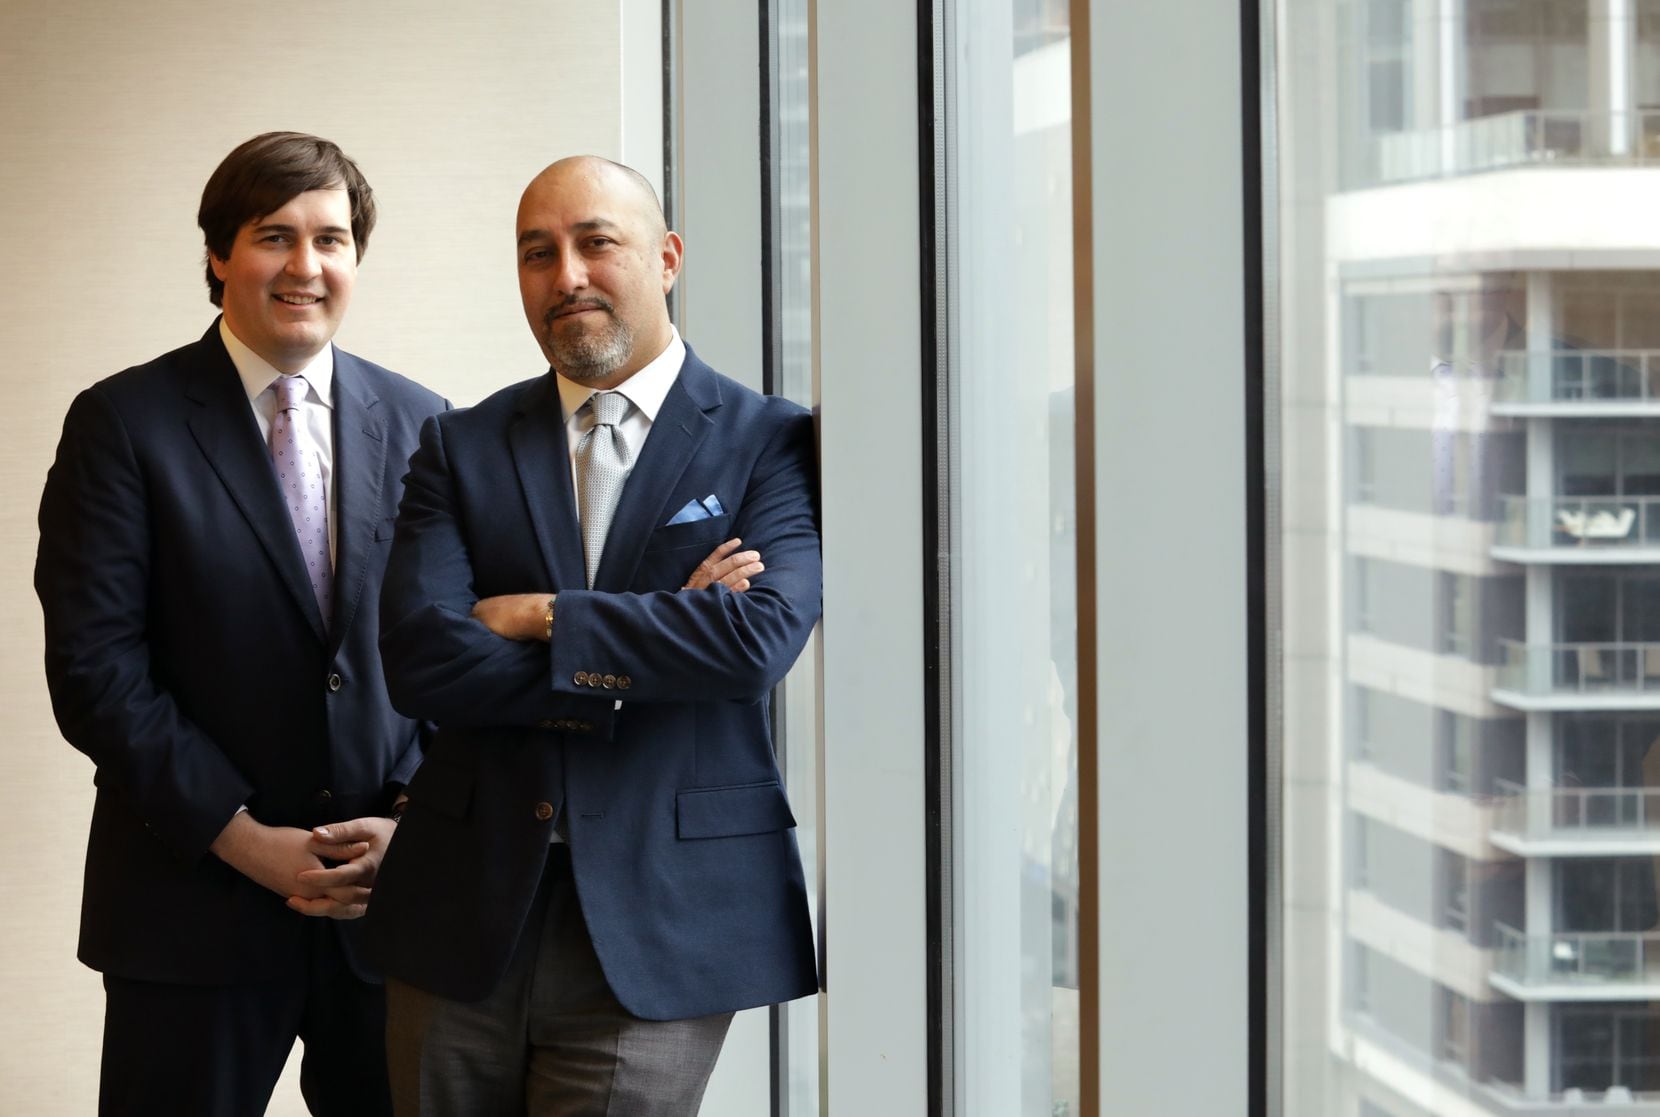 Luis Campos (right) and Brent Beckert are lawyers with Haynes and Boone in Dallas who...